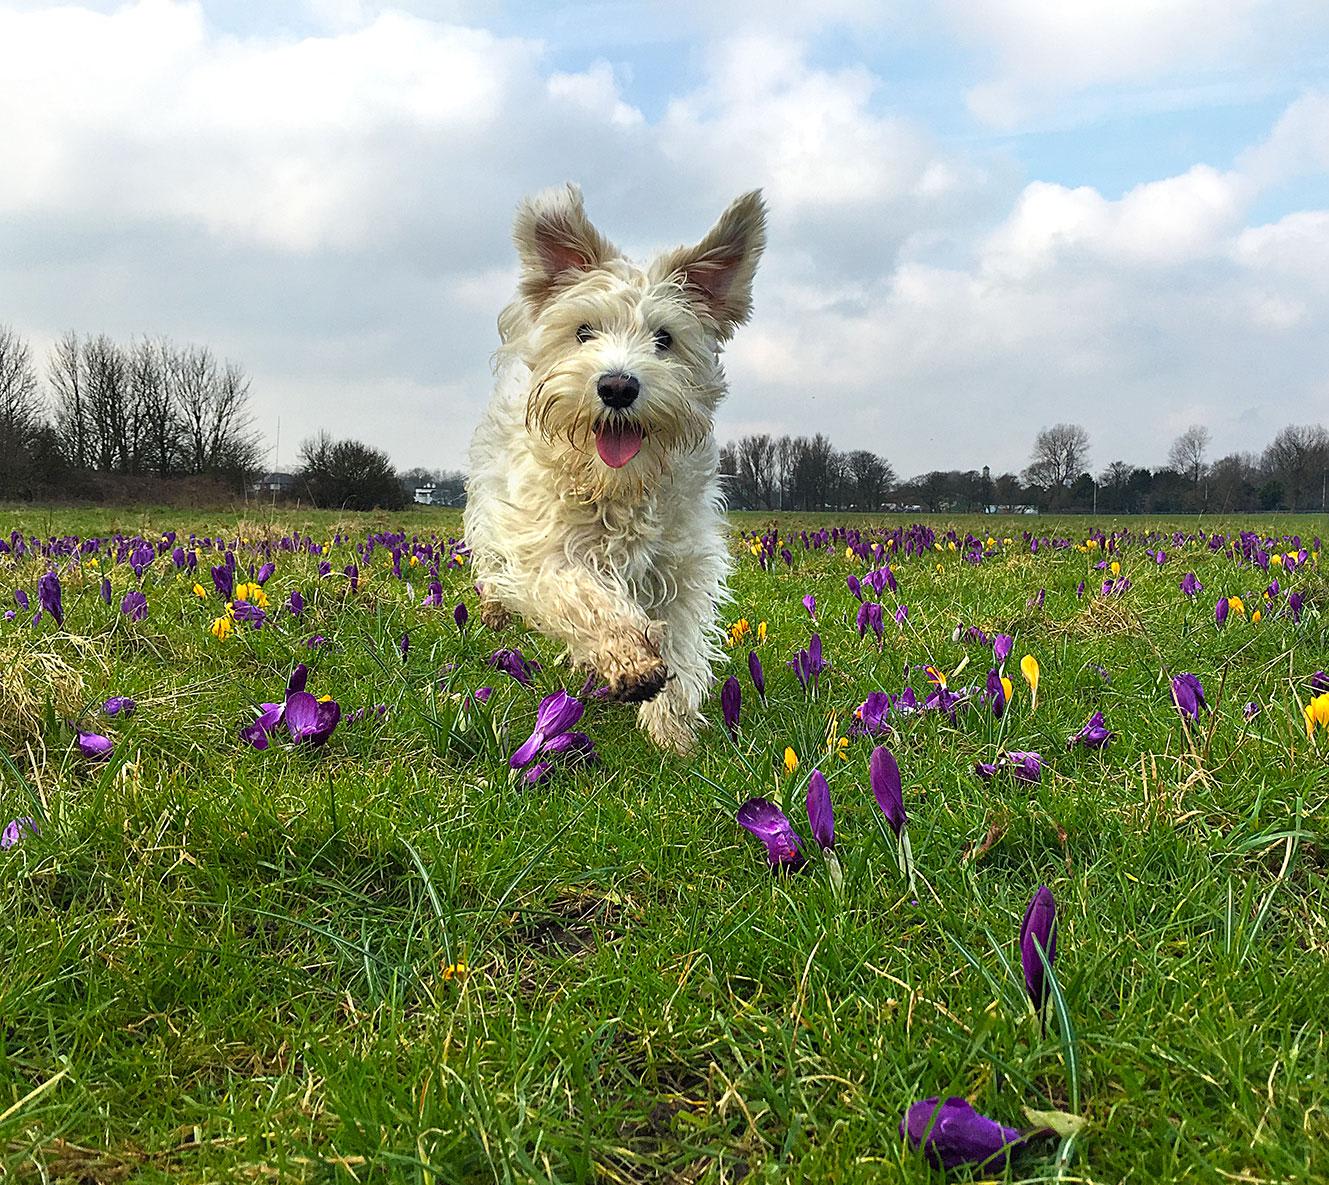 Take The Lead - Professional Dog Walking & Pet Services In Blackpool | Blackpool FY1 5FG | +44 7766 220024